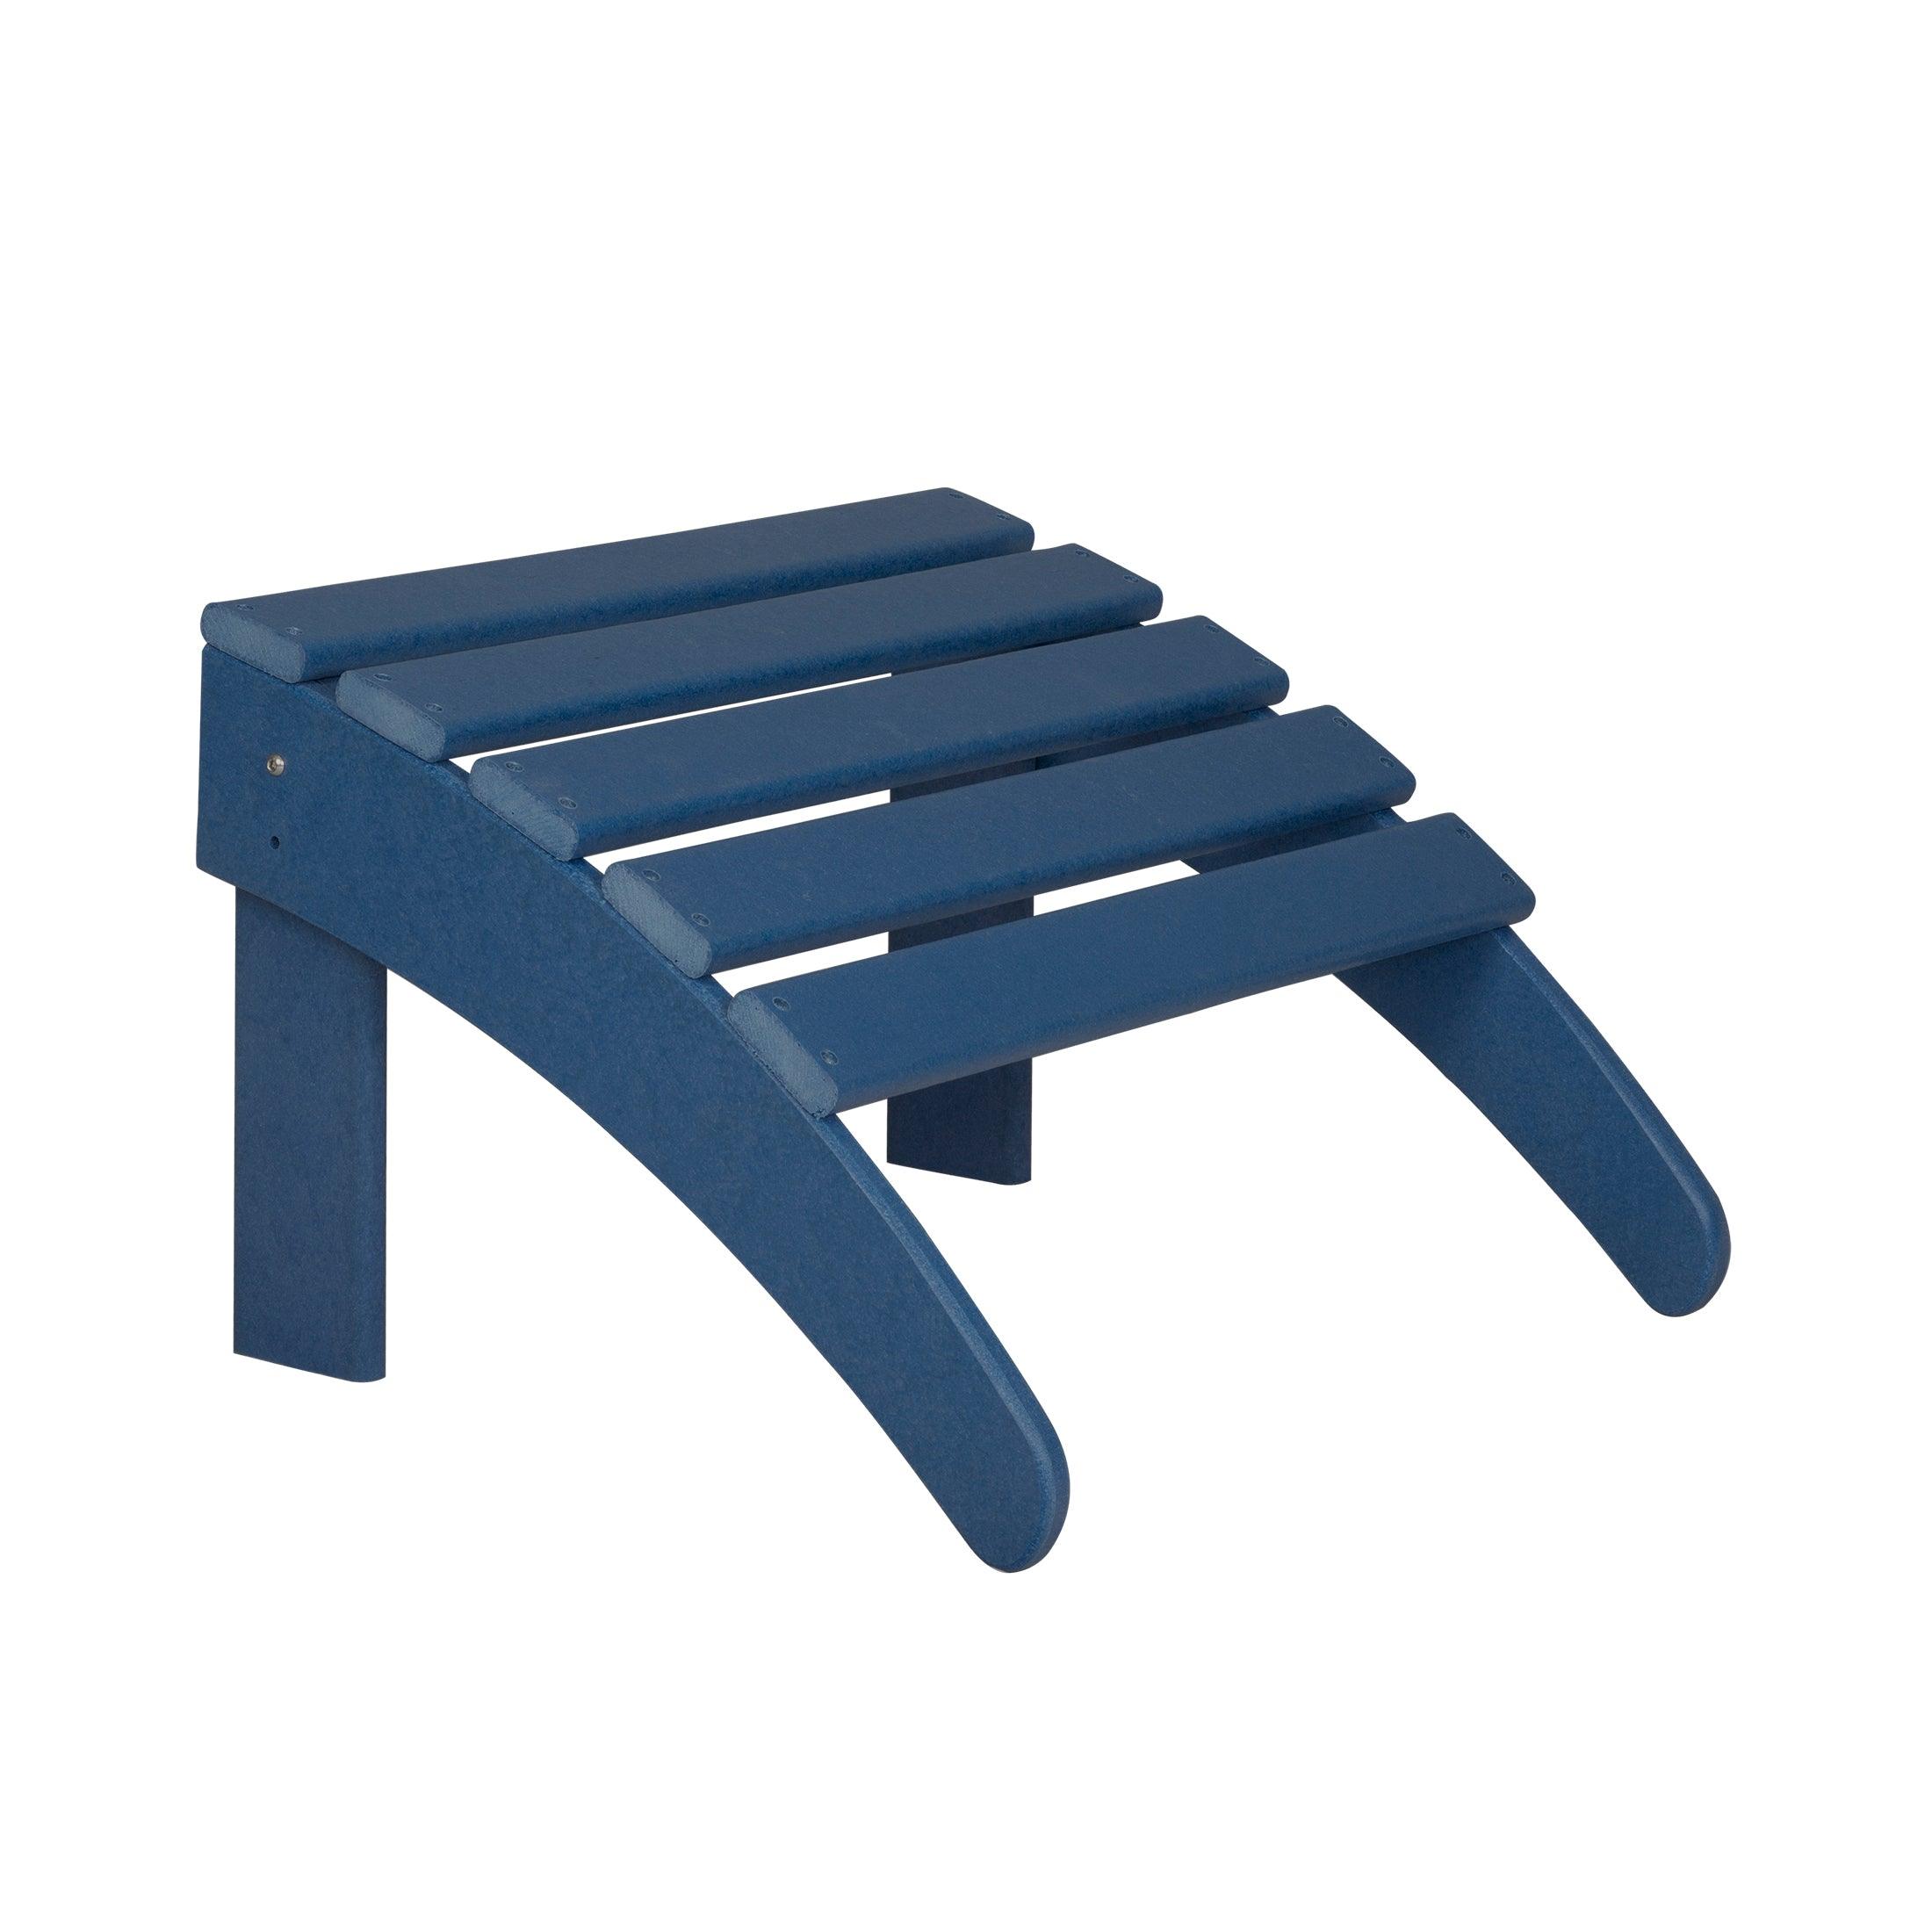 Costaelm Outdoor Adirondack Chair With Ottoman 2-Piece Set, Navy Blue